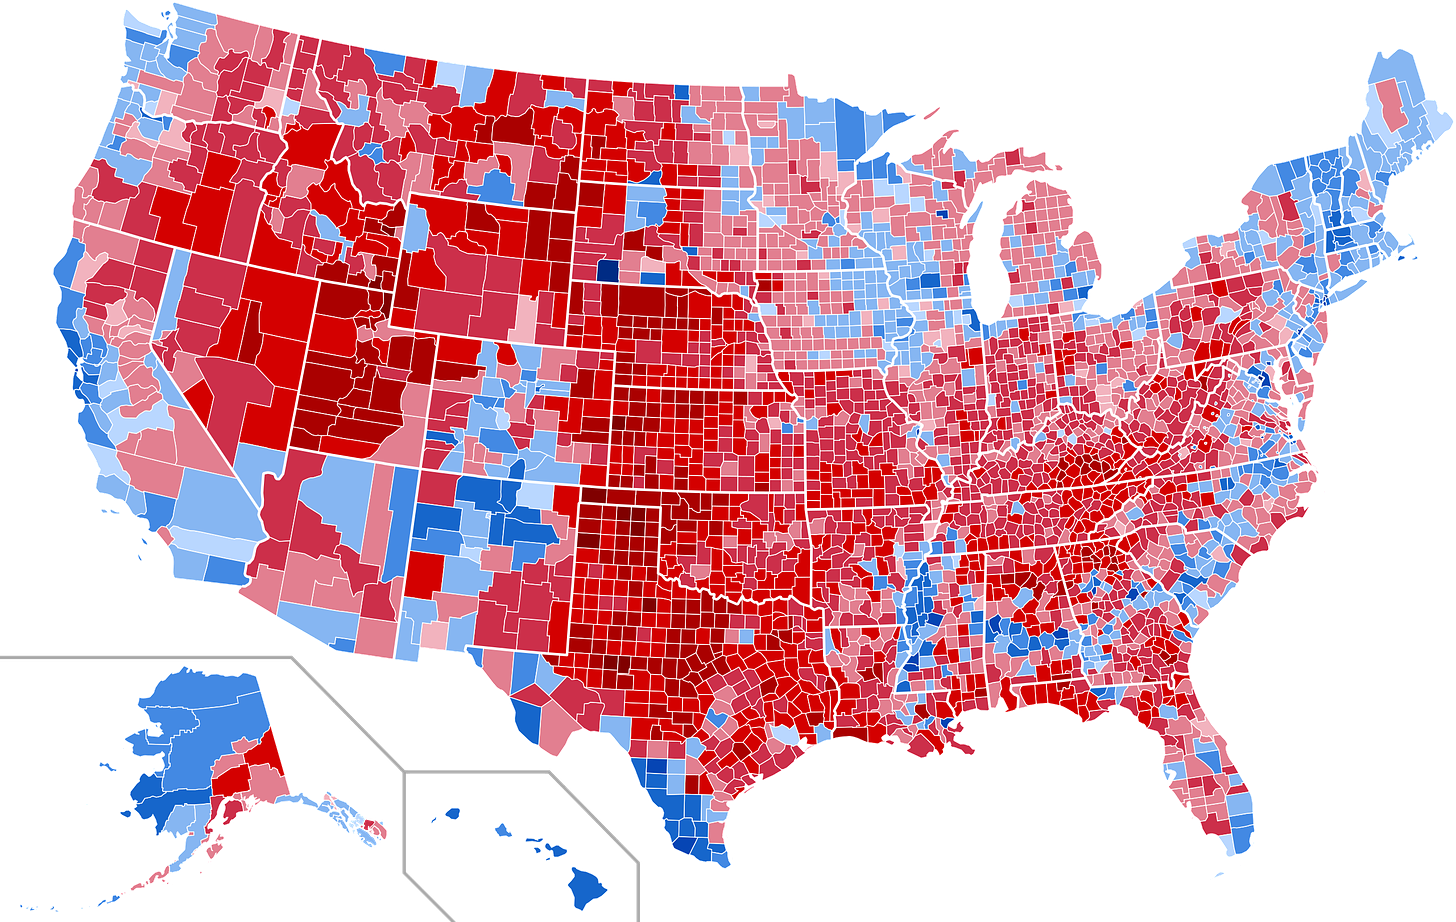 Results by county, shaded according to winning candidate's percentage of the vote.